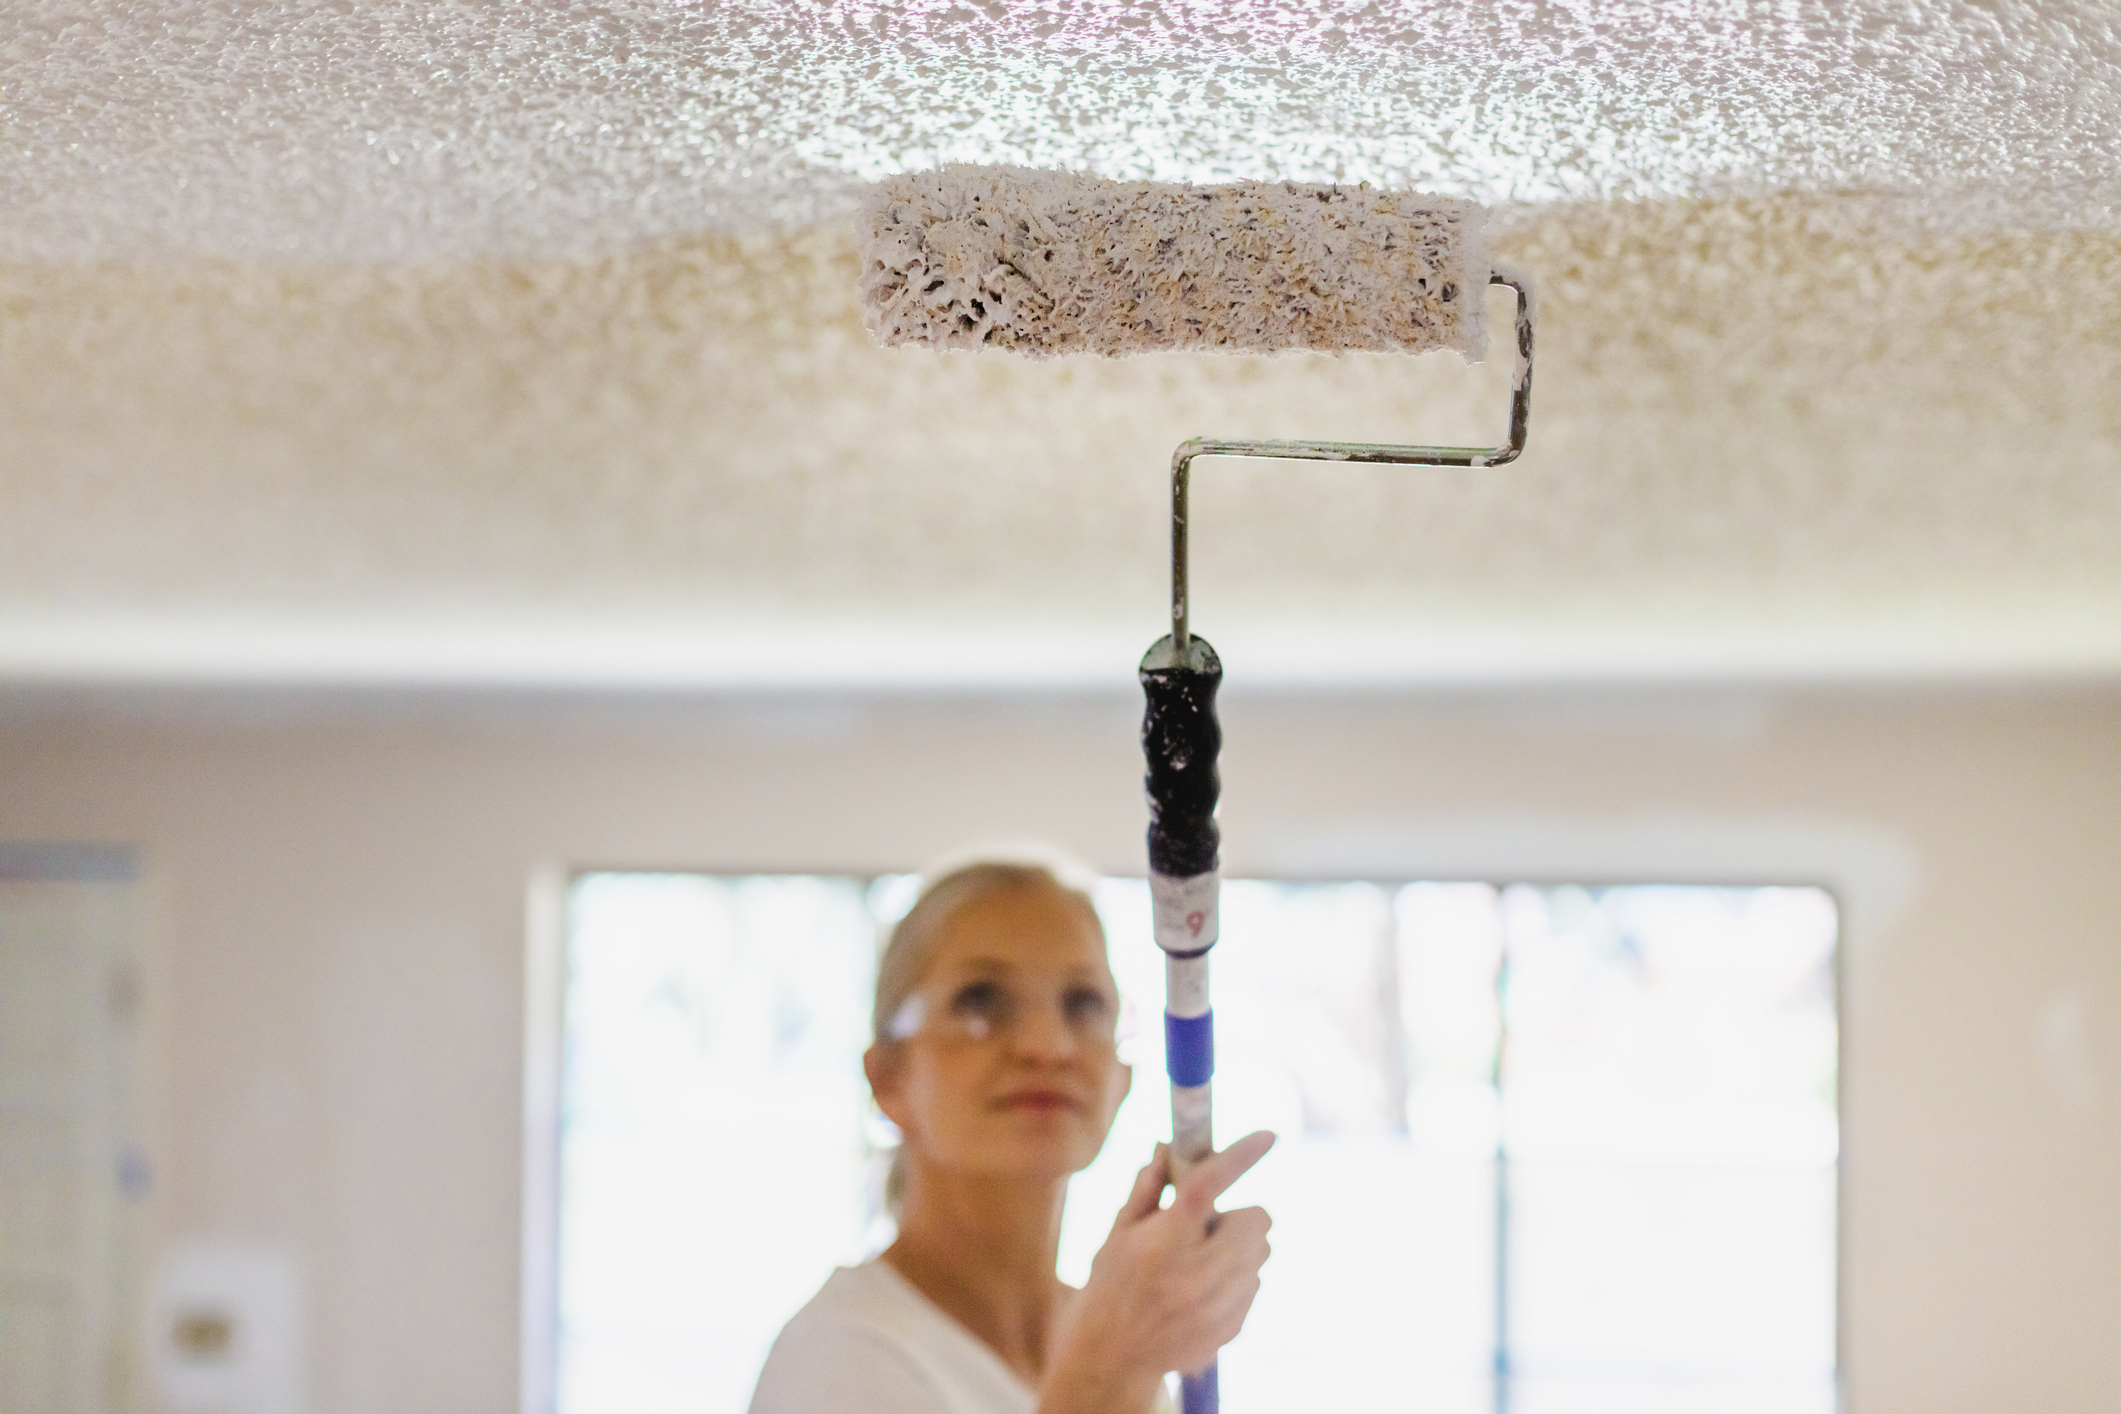 Applying Drywall Compound With a Textured Roller